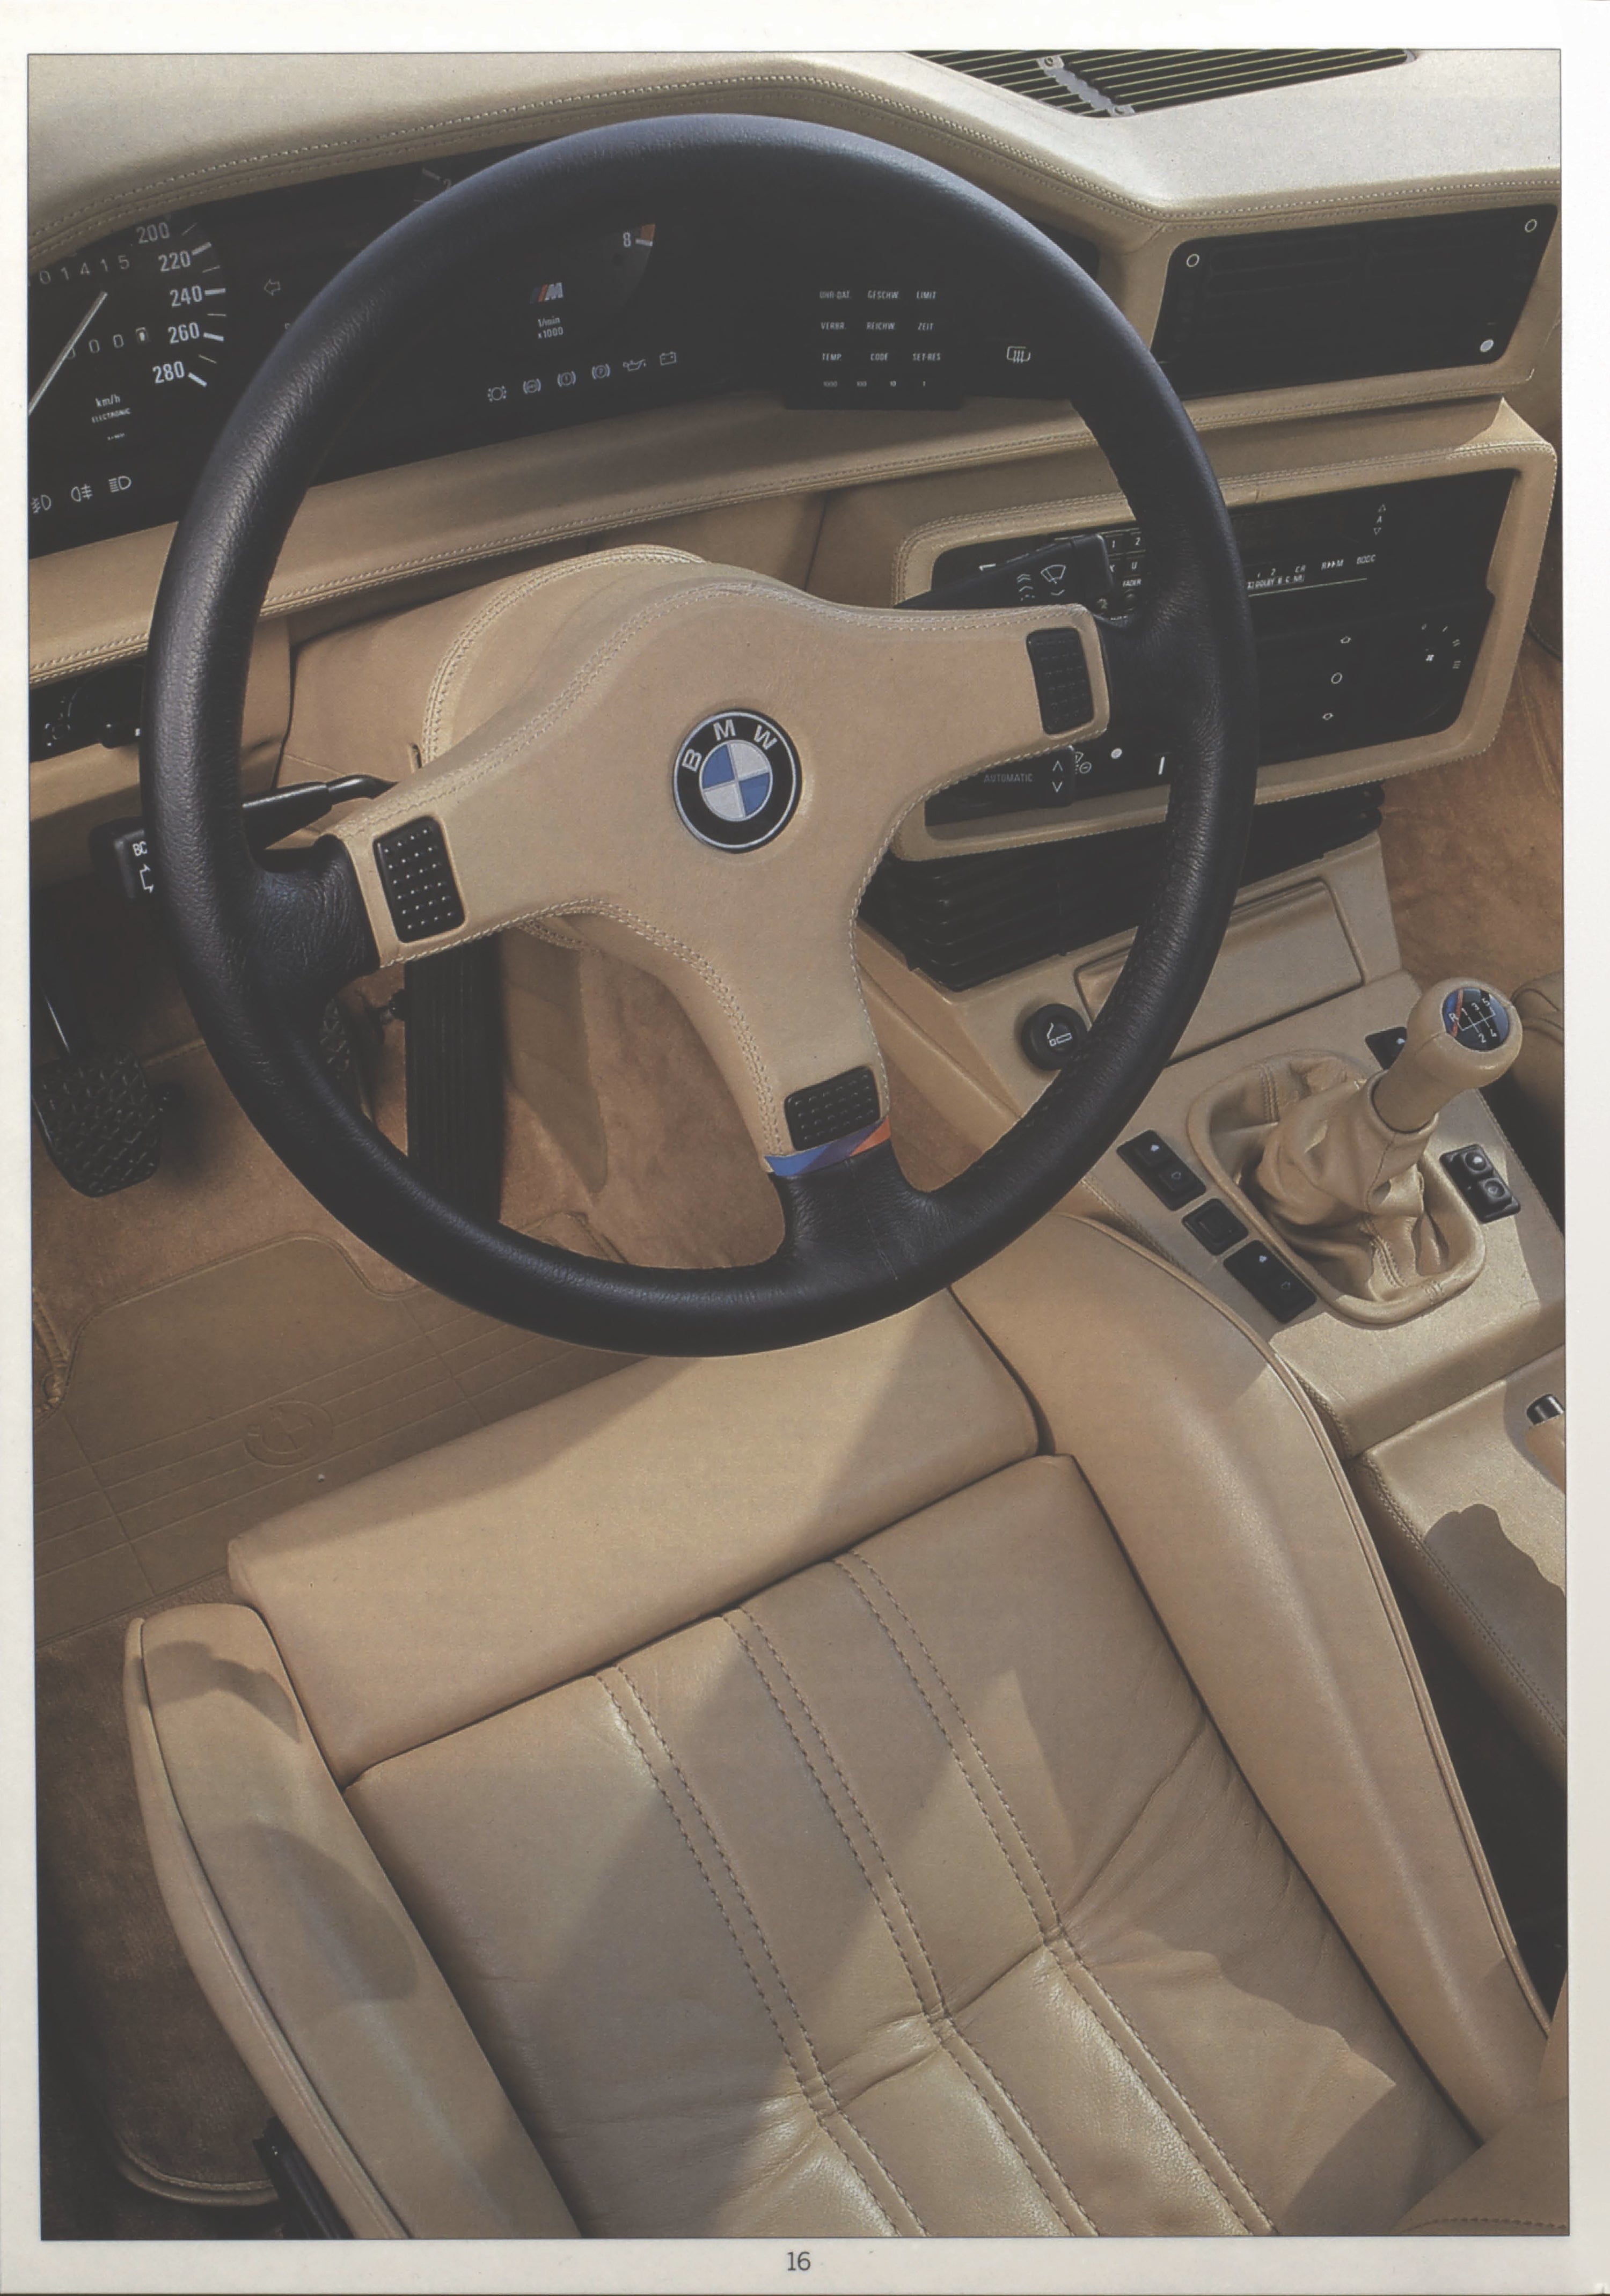 journals/kith-for-bmw-2020-27